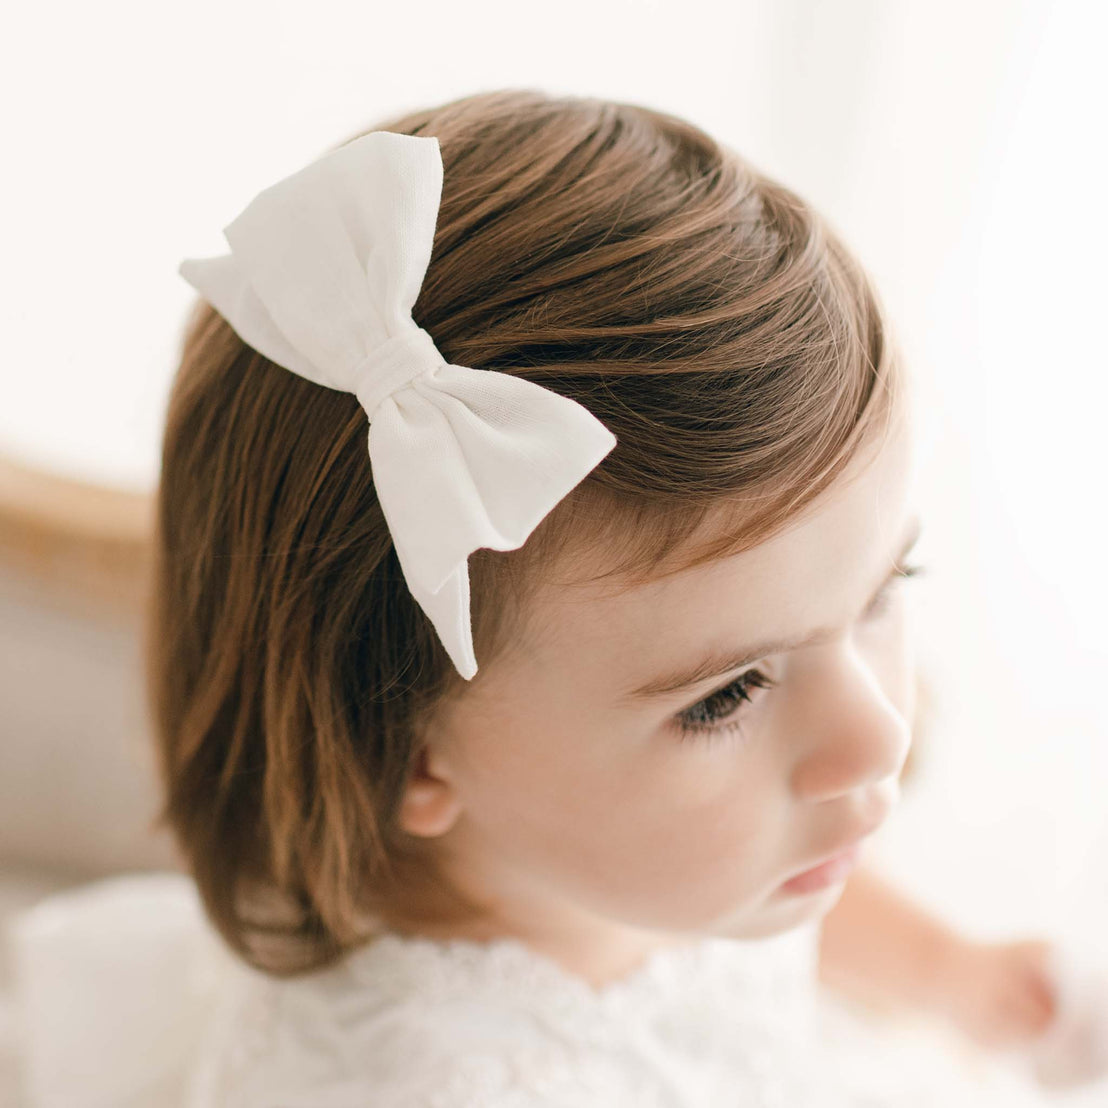 Close up detail of the Penelope silk bow on young toddler.